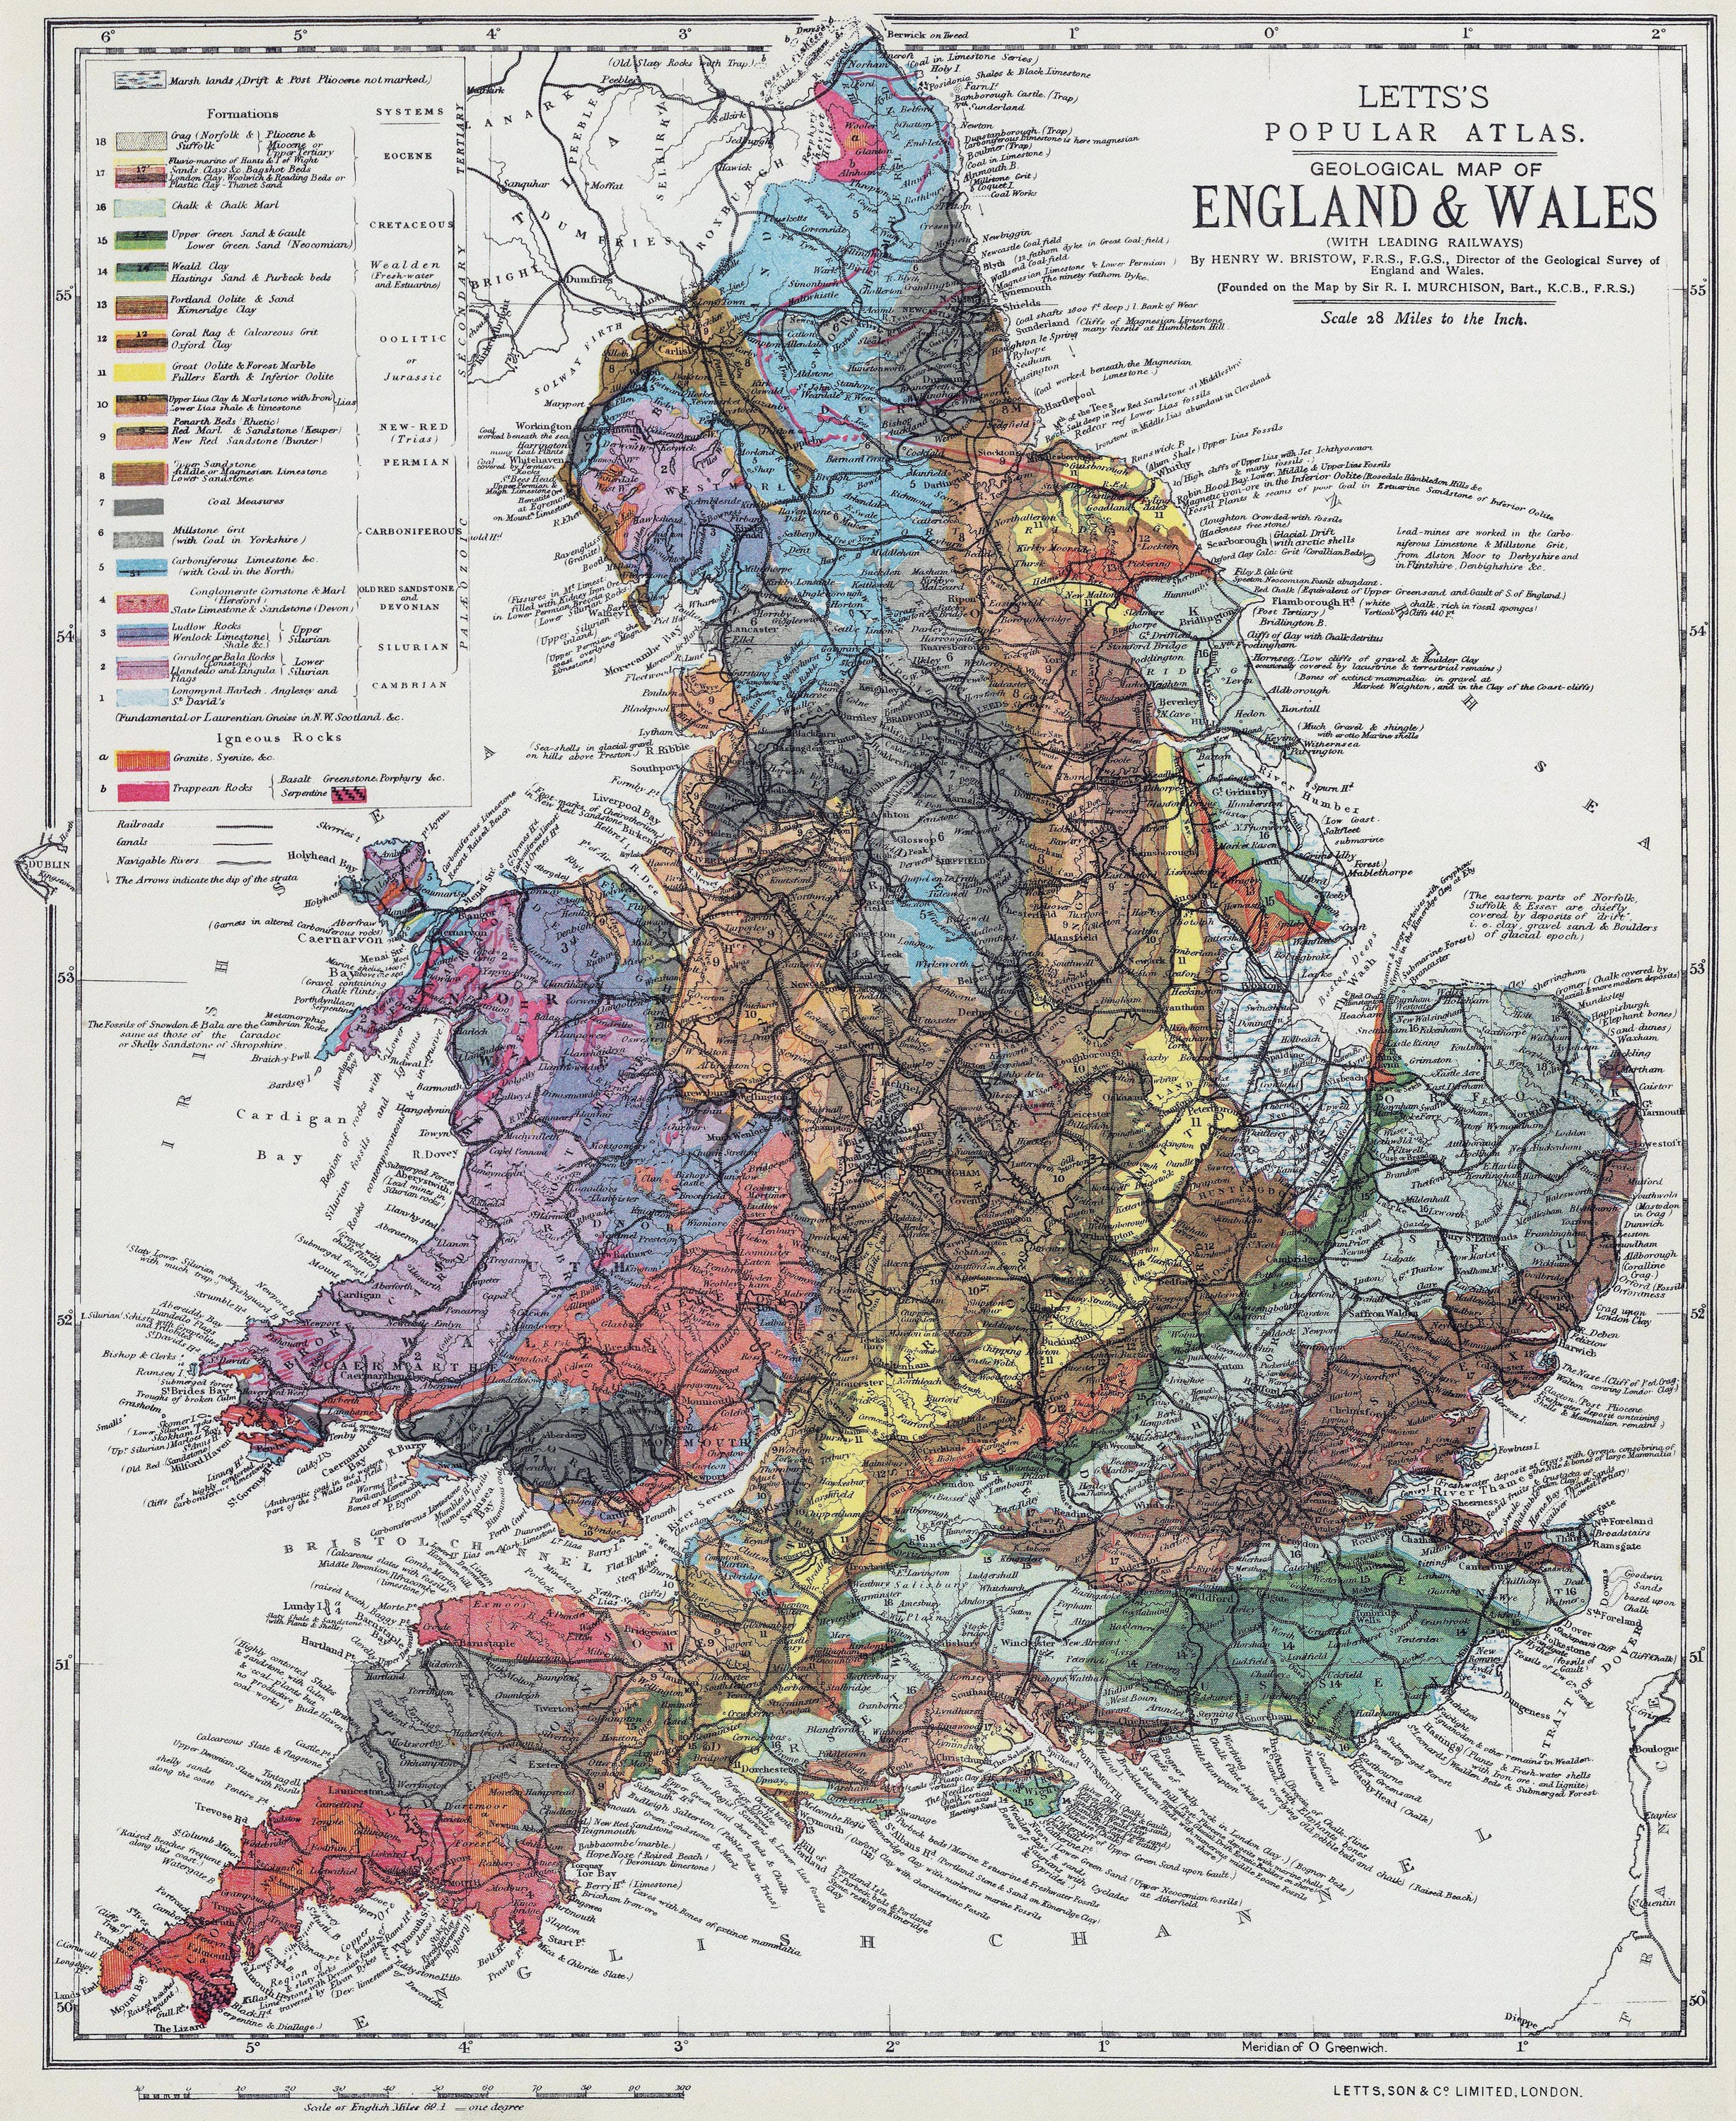 Geological Map of England & Wales 1883 by H W Barstow large modern reprint 